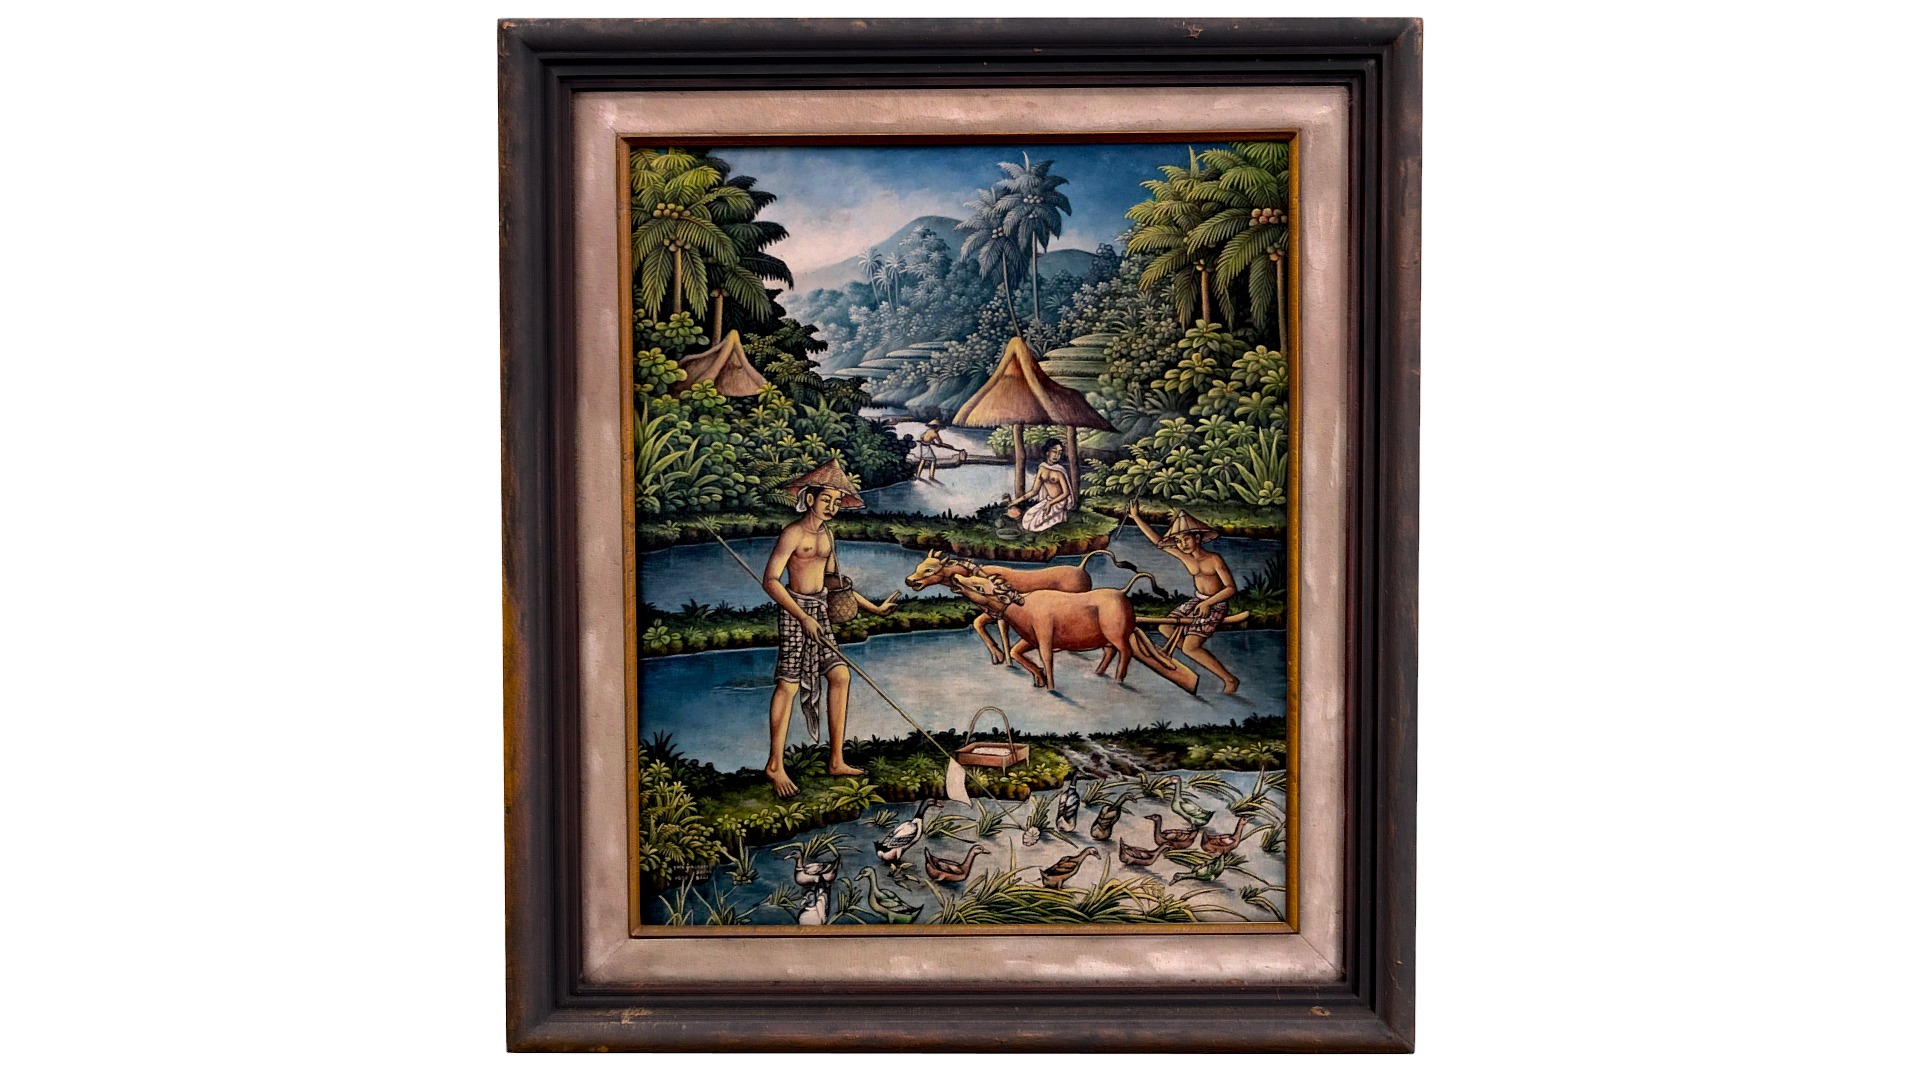 3D model Balinese picture, wood frame, rural landscape - This is a 3D model of the Balinese picture, wood frame, rural landscape. The 3D model is about a painting of a person and a horse in a field.